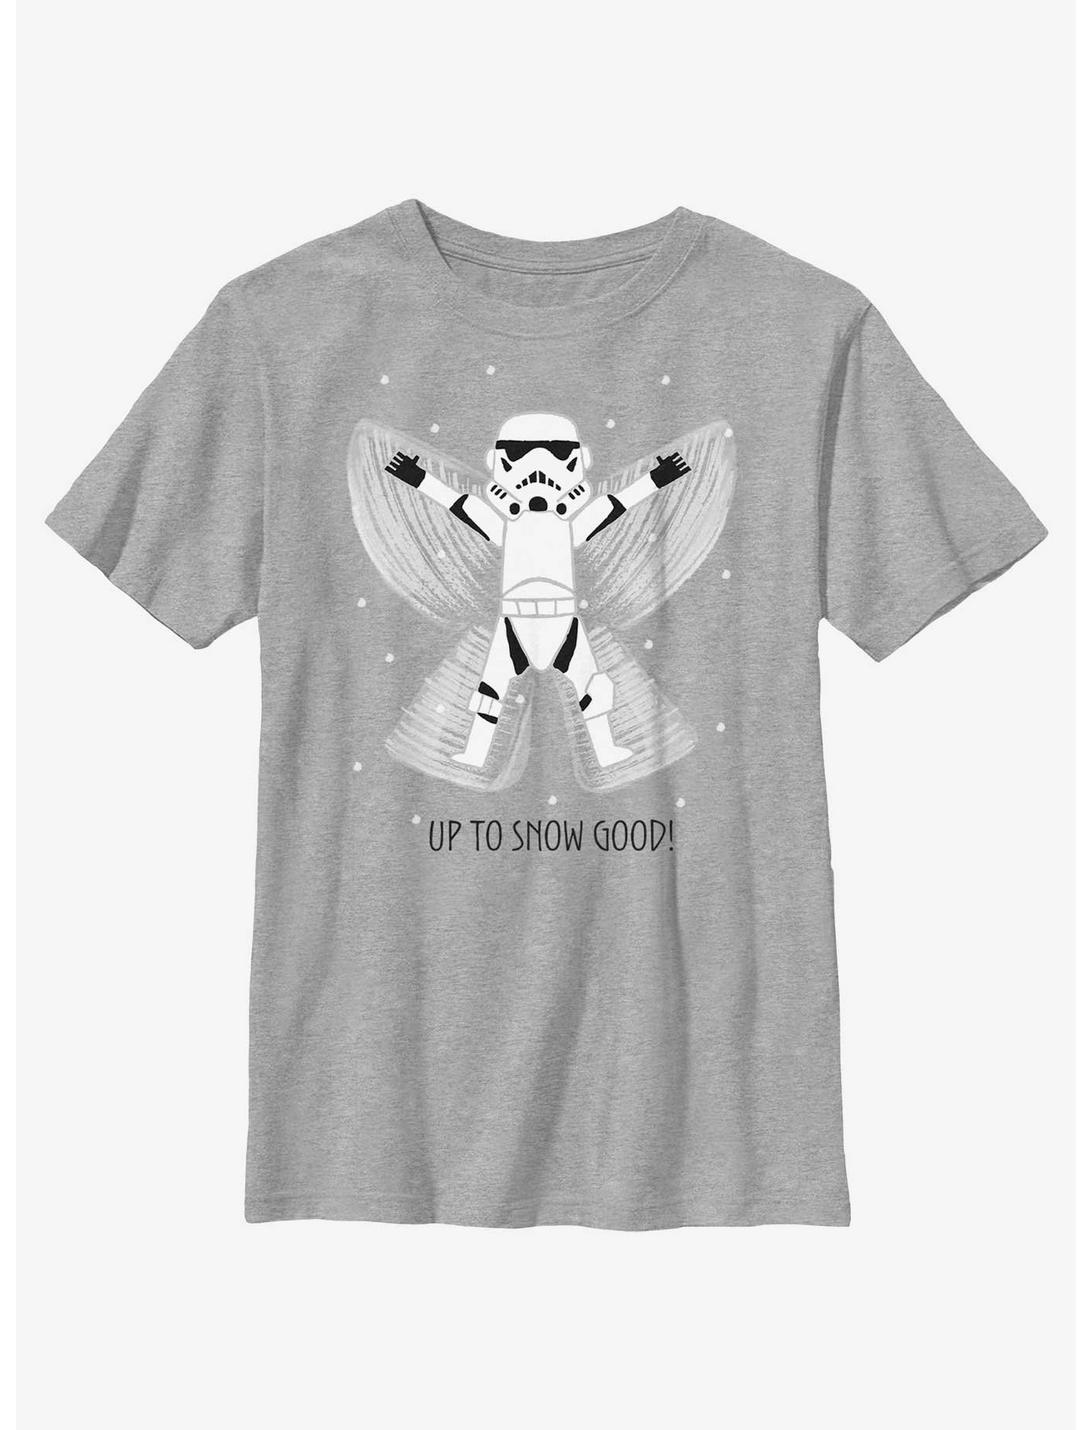 Star Wars Storm Trooper Up To Snow Good Youth T-Shirt, ATH HTR, hi-res